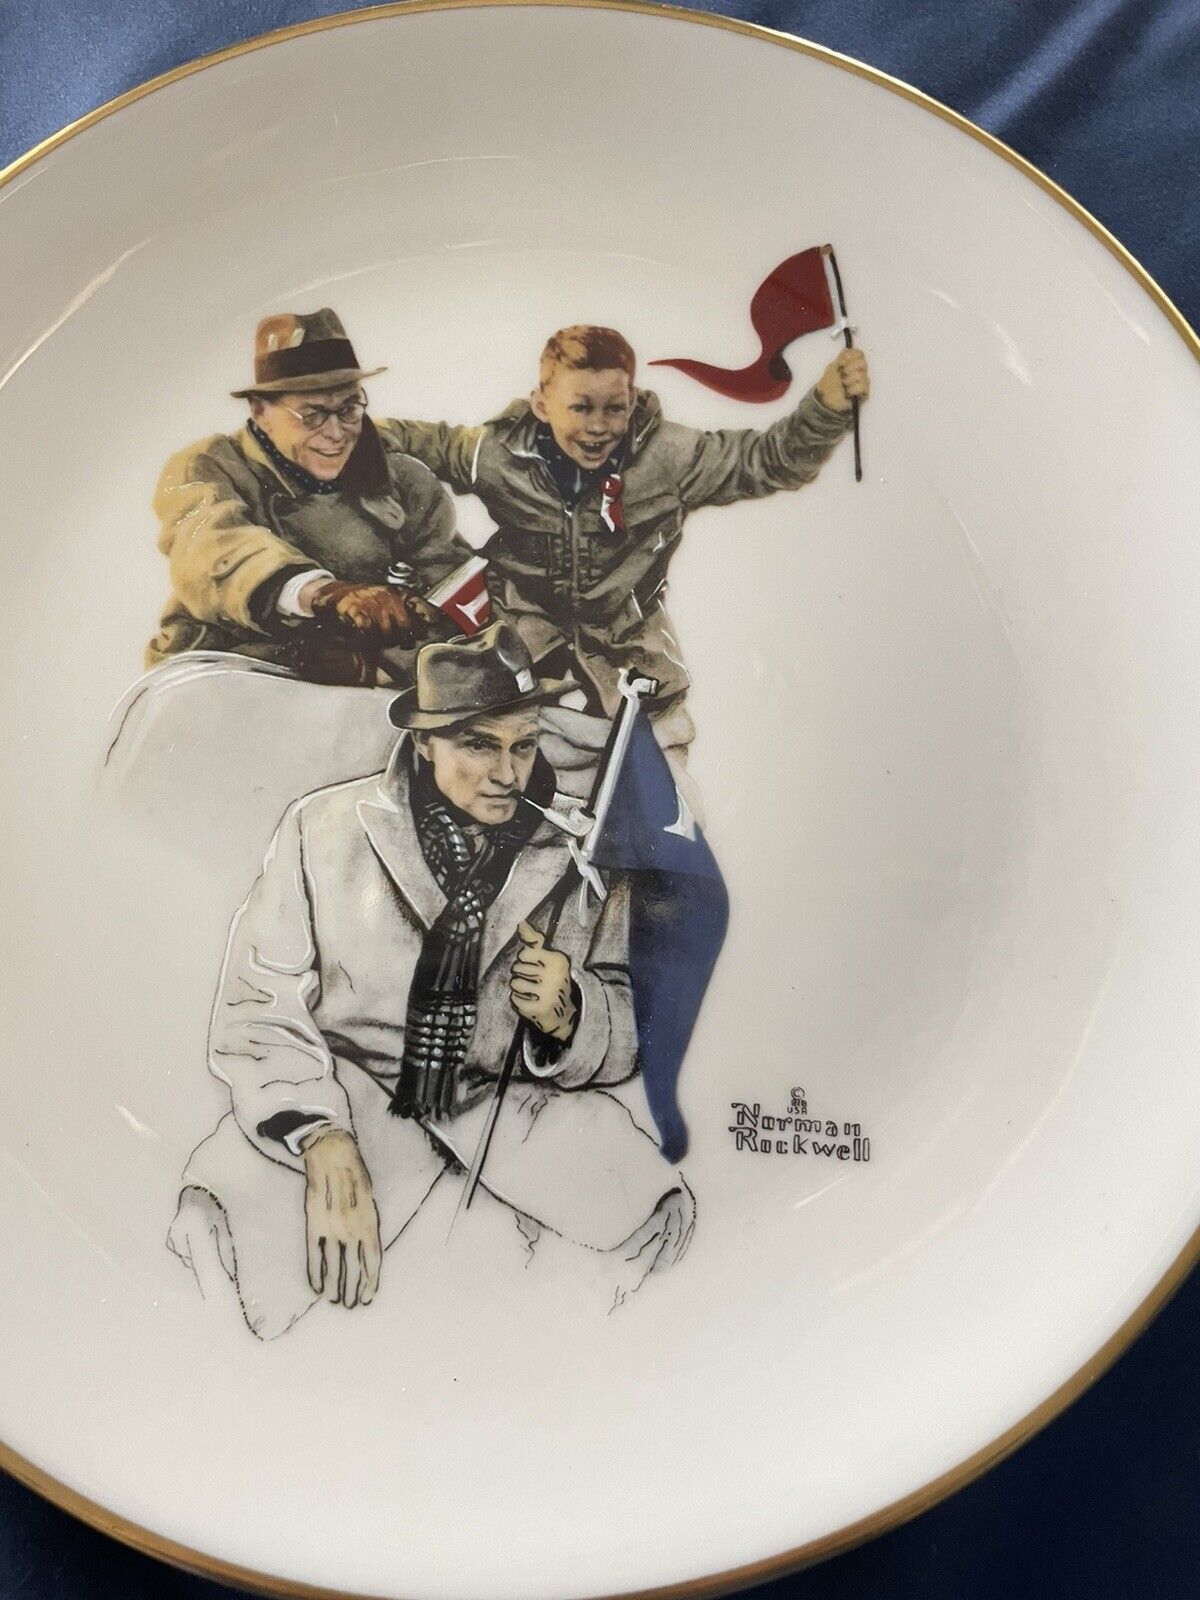 Gorham Norman Rockwell 1962 Fall- Cheering The Champ 1982 Limited Edition Plate 